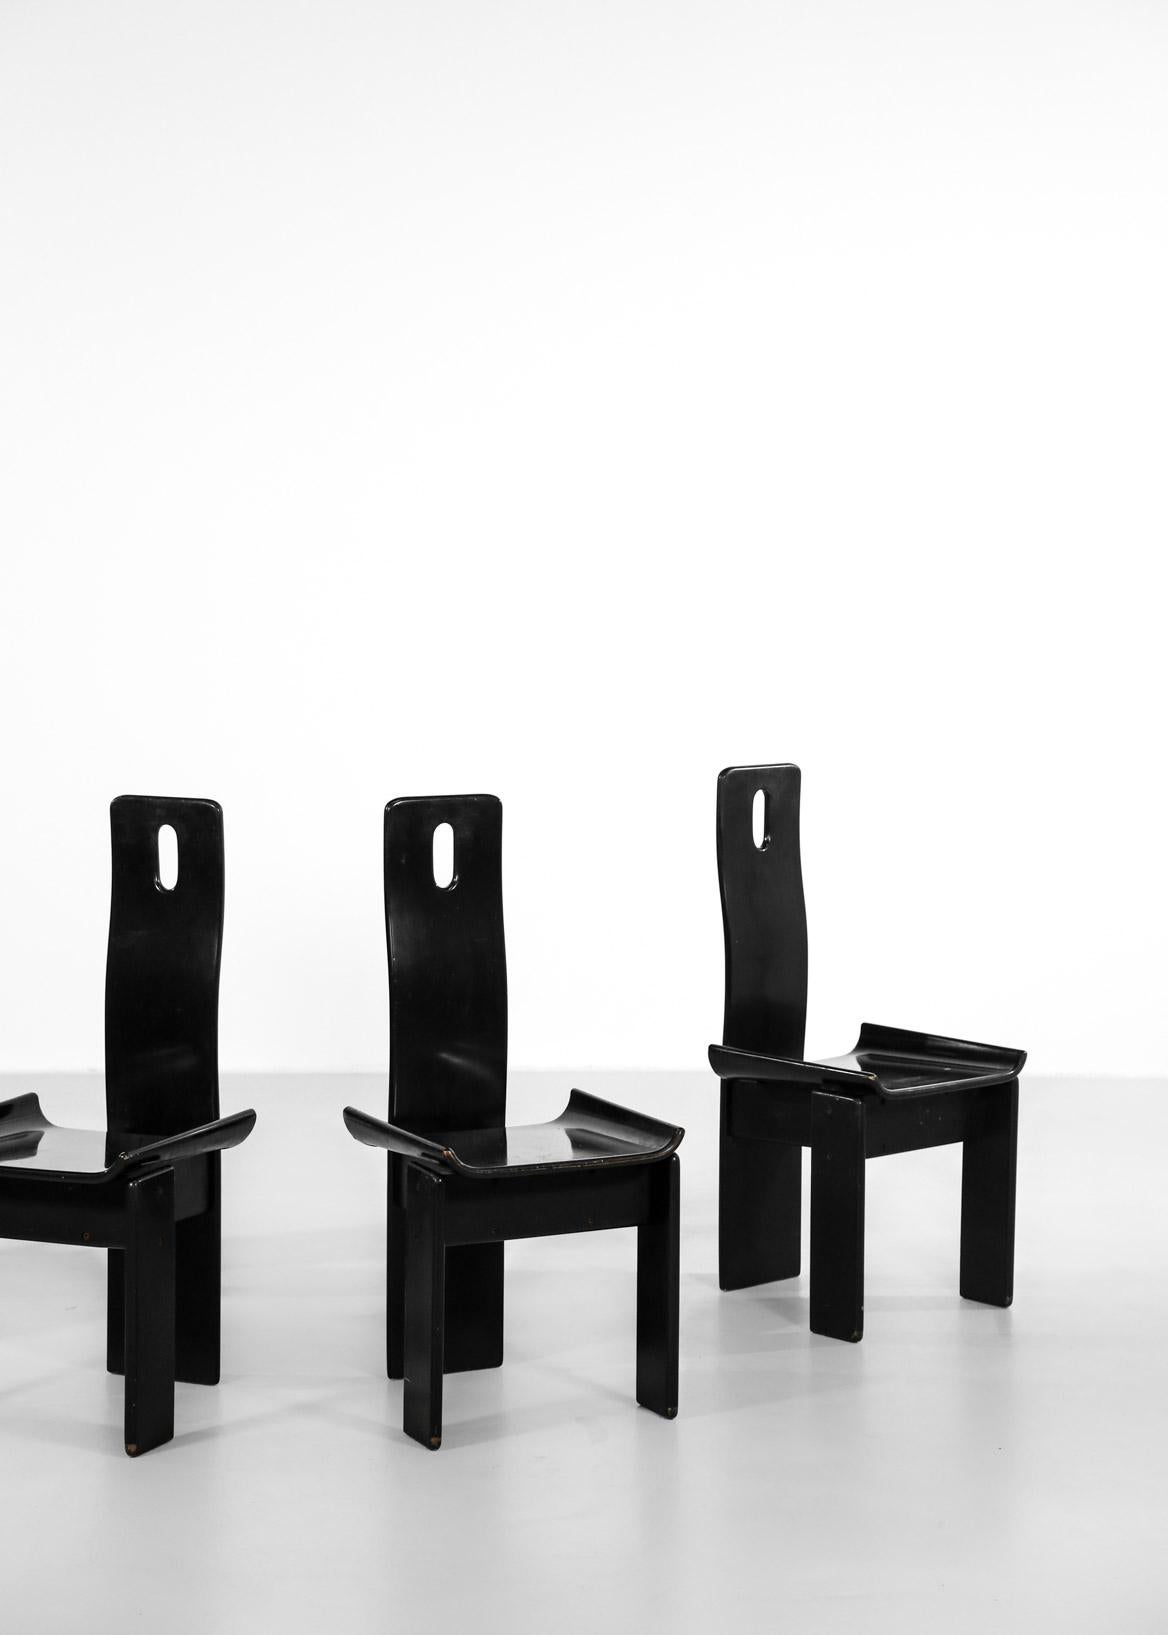 Set of 4 chairs in the style of Vico Magistretti.
    